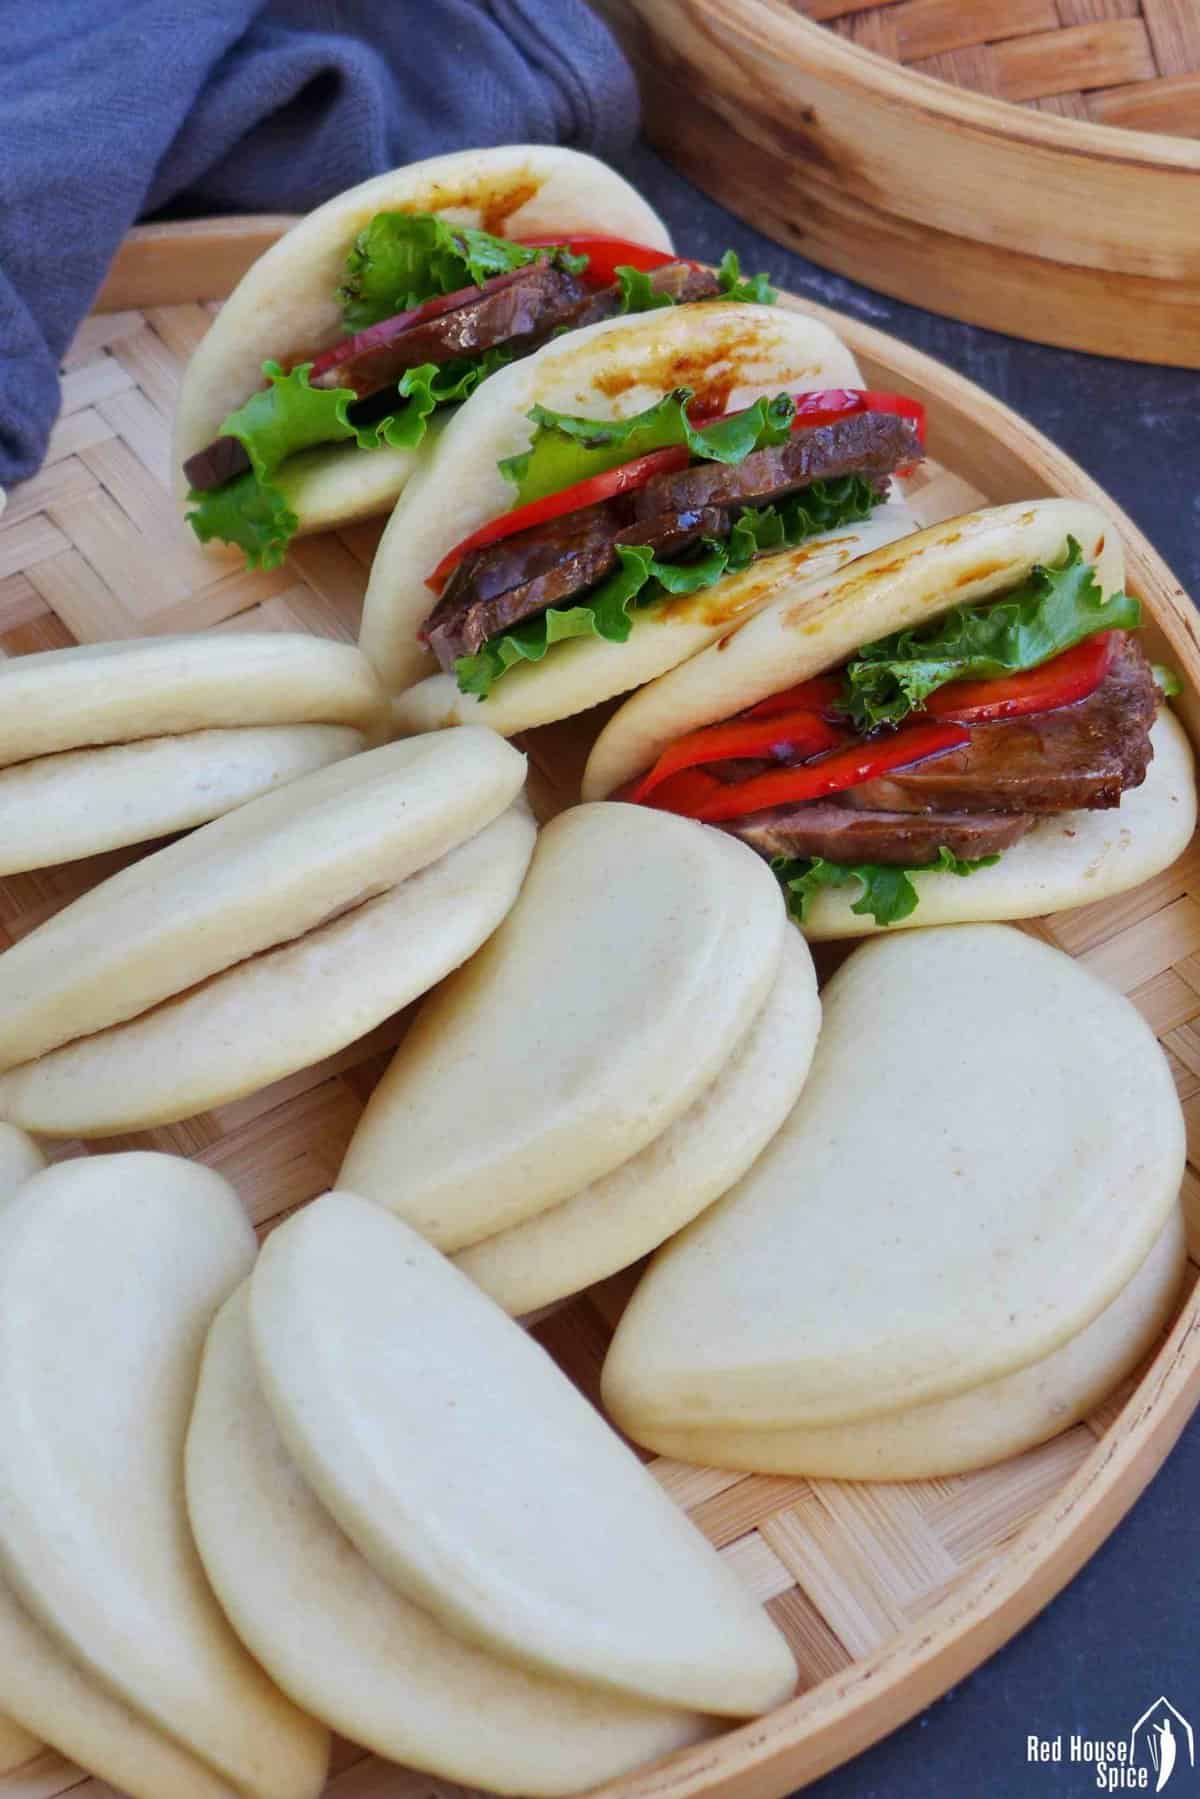 steamed bao buns. Some plain and some with fillings.